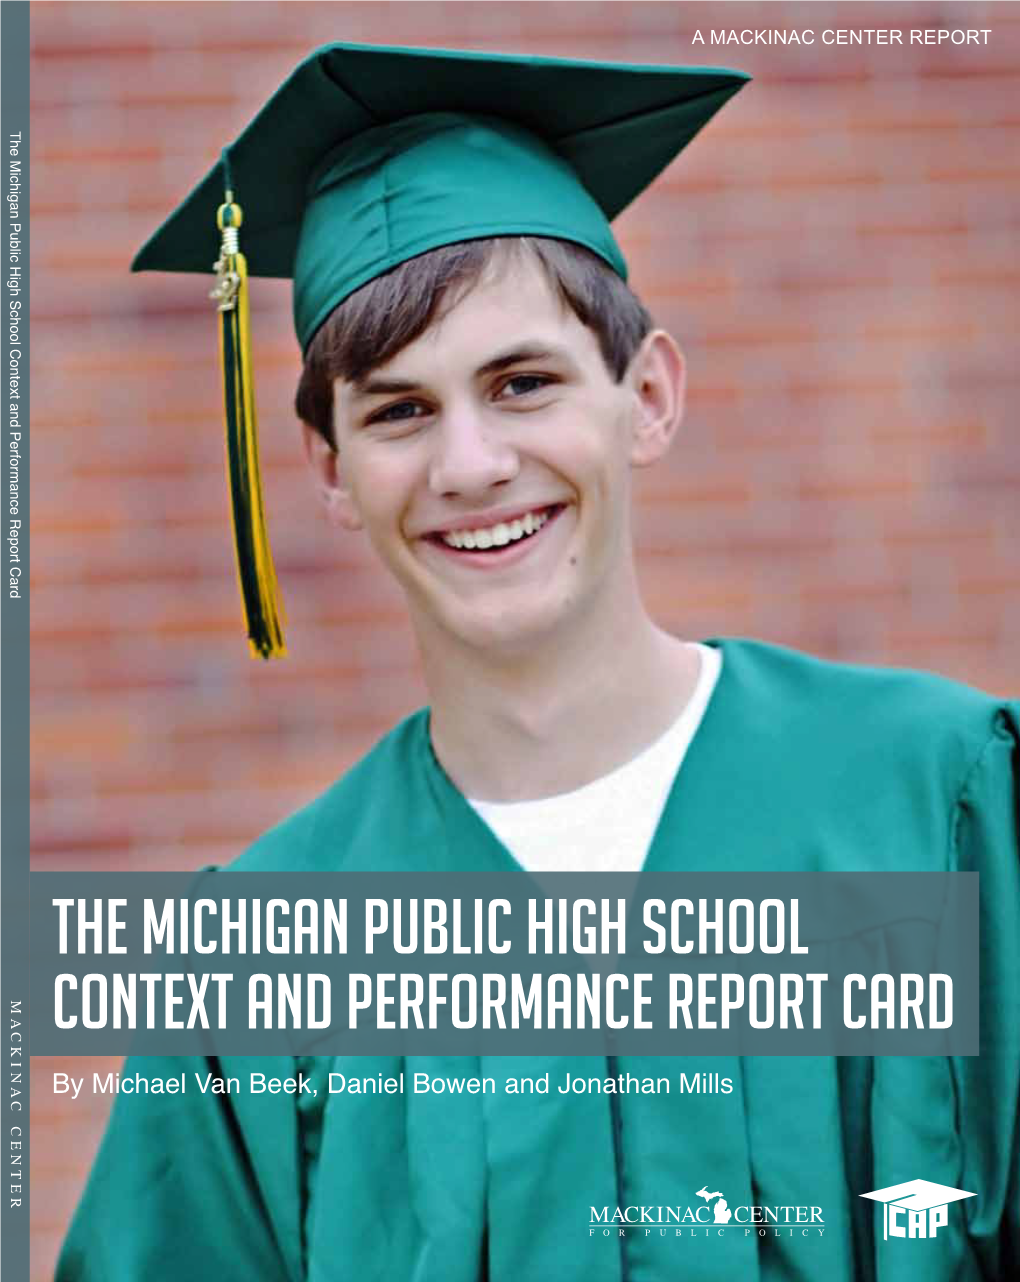 The Michigan Public High School Context and Performance Report Card